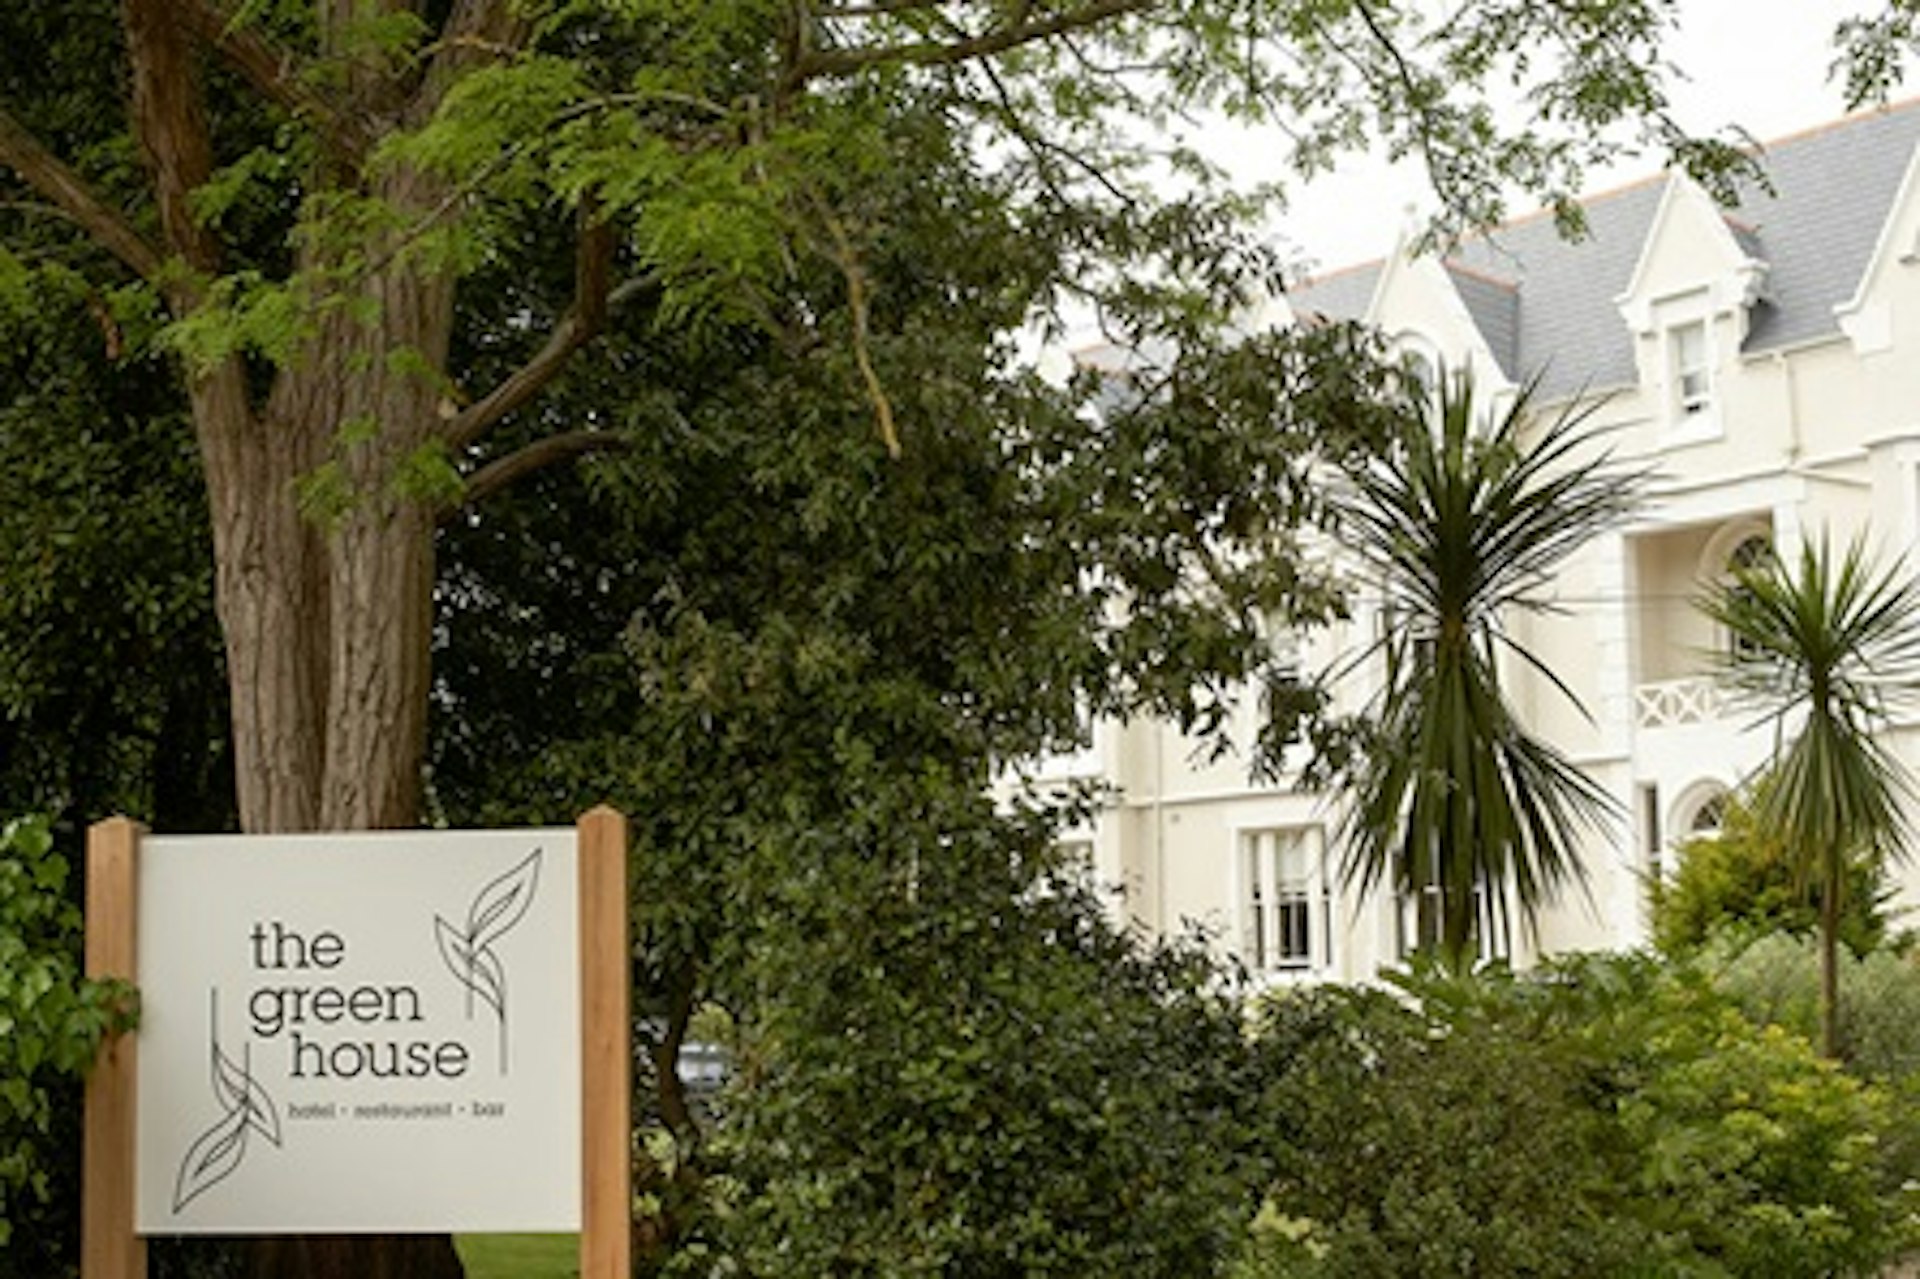 One Night Coastal Escape for Two at the Luxury 4* Green House Hotel, Bournemouth 2